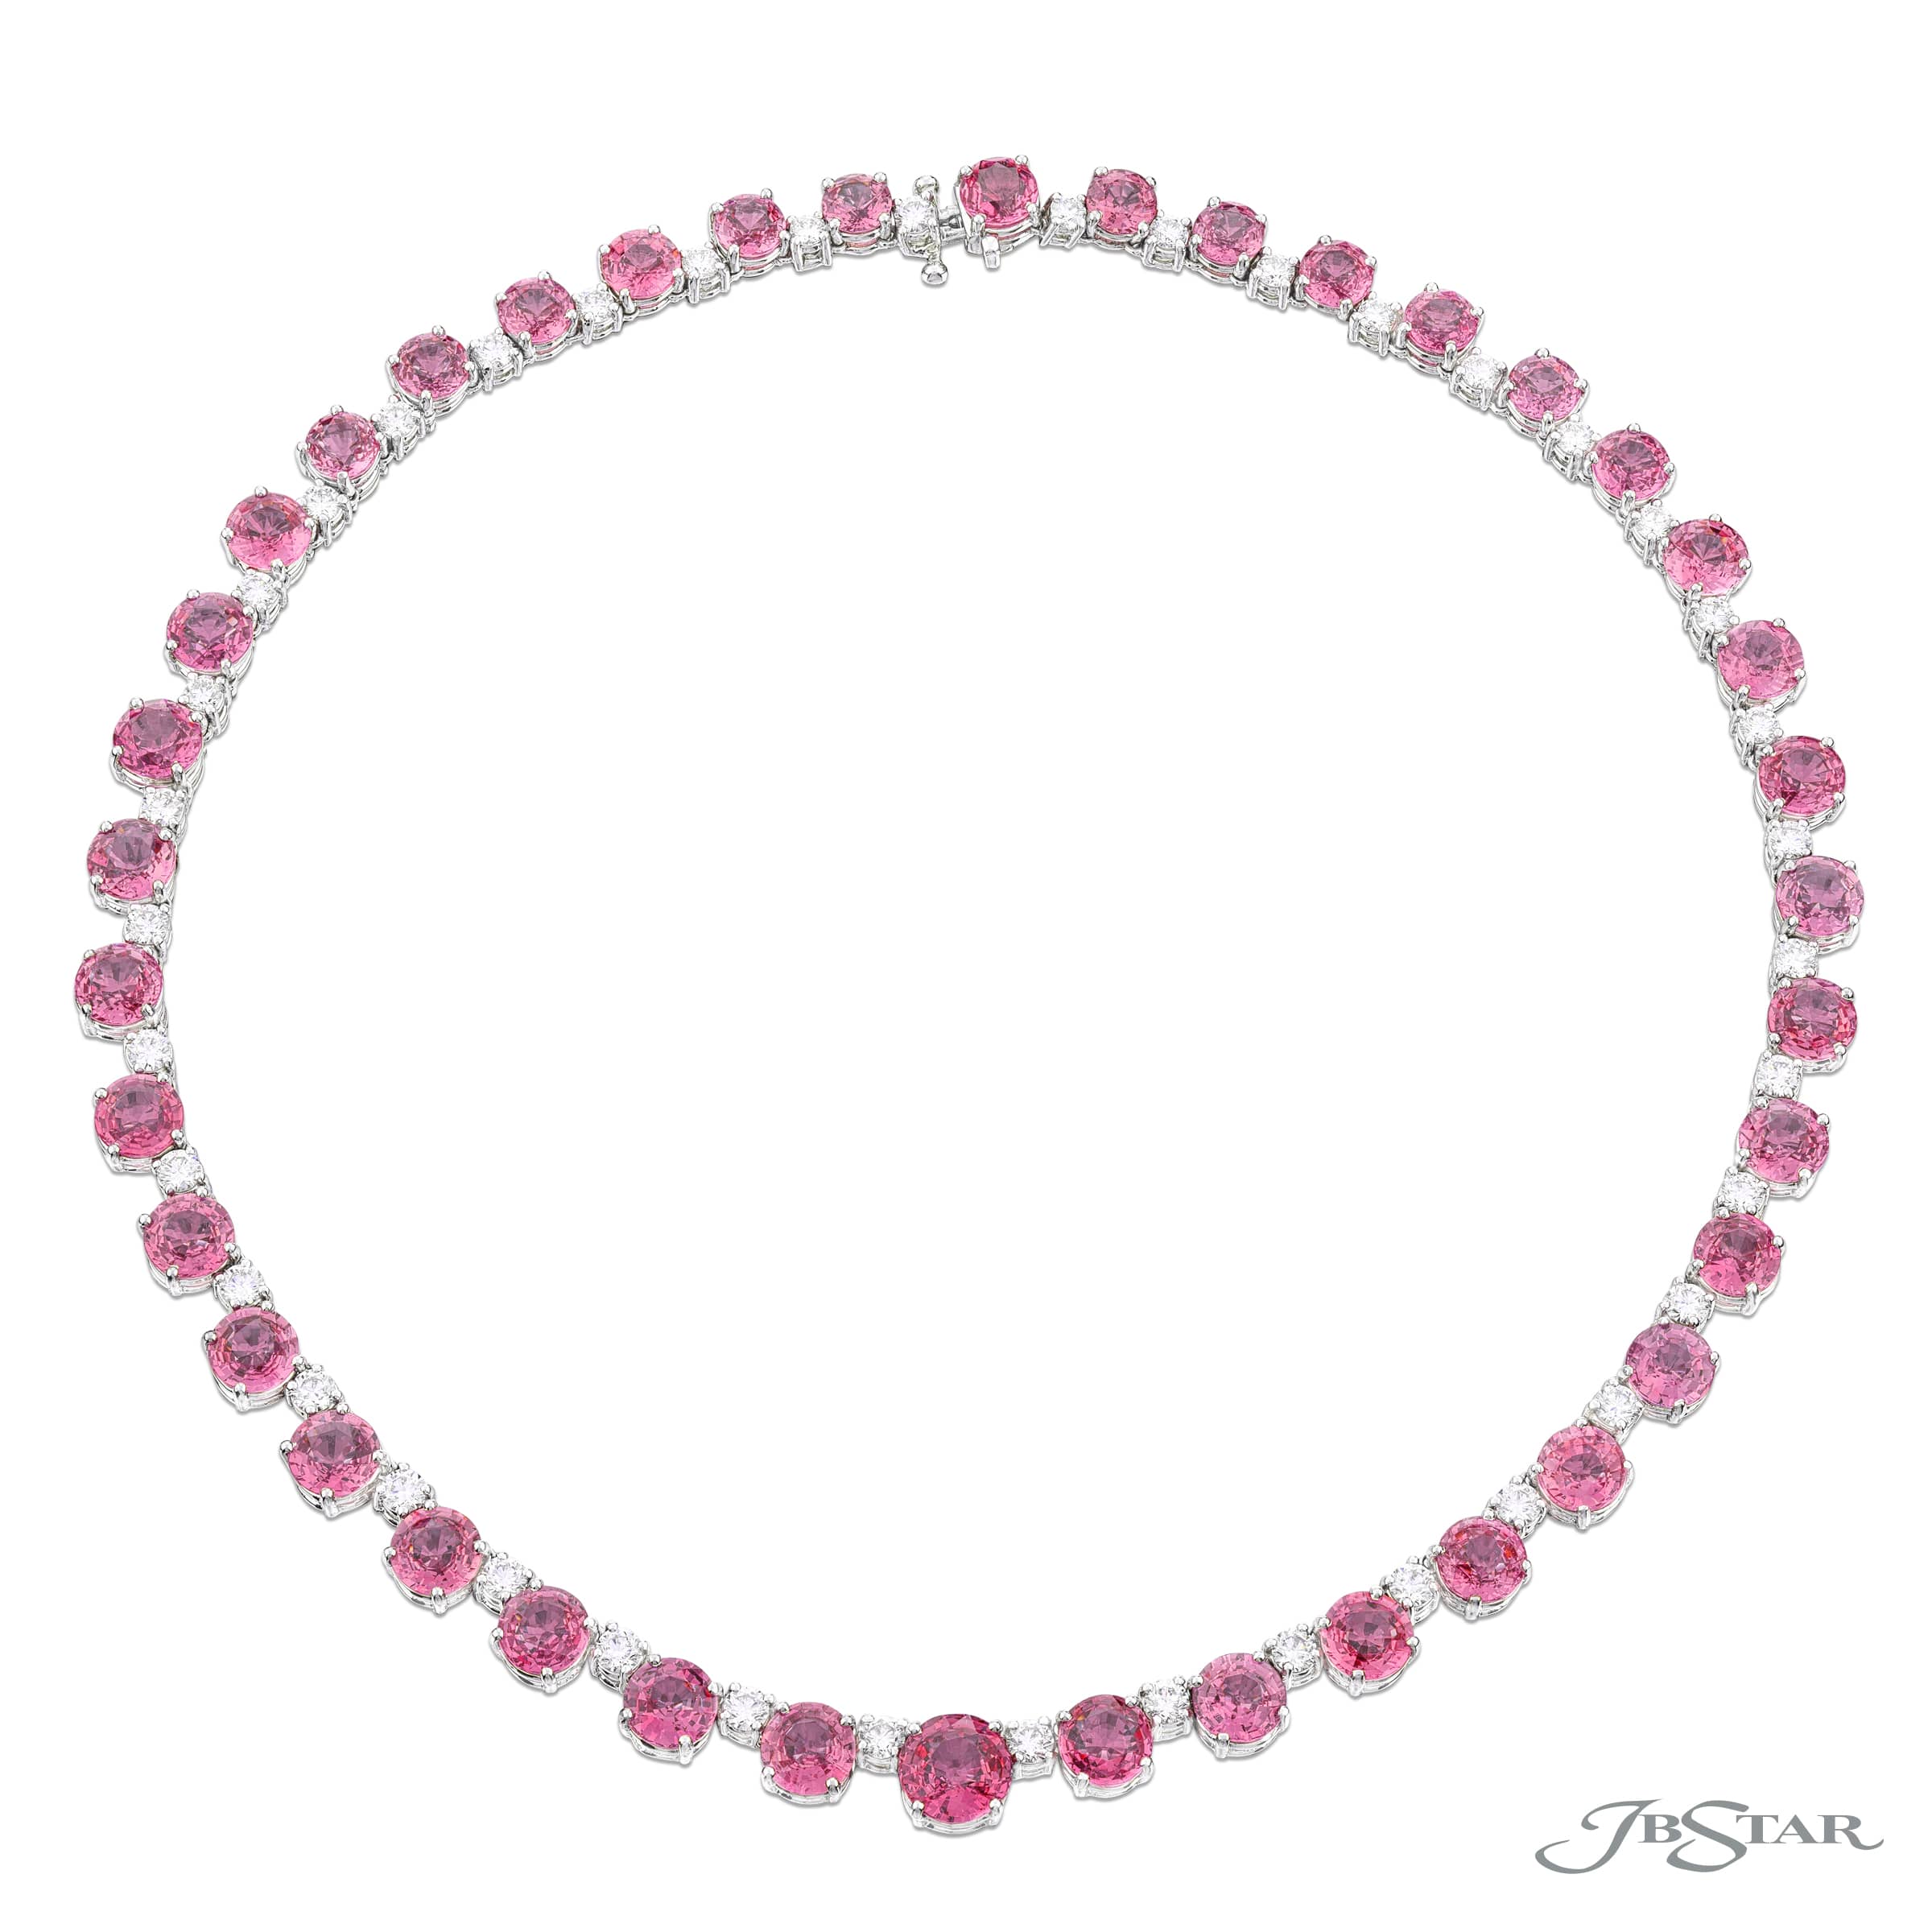 Heart Pink Sapphire Diamond Necklace 40829: quality jewelry at